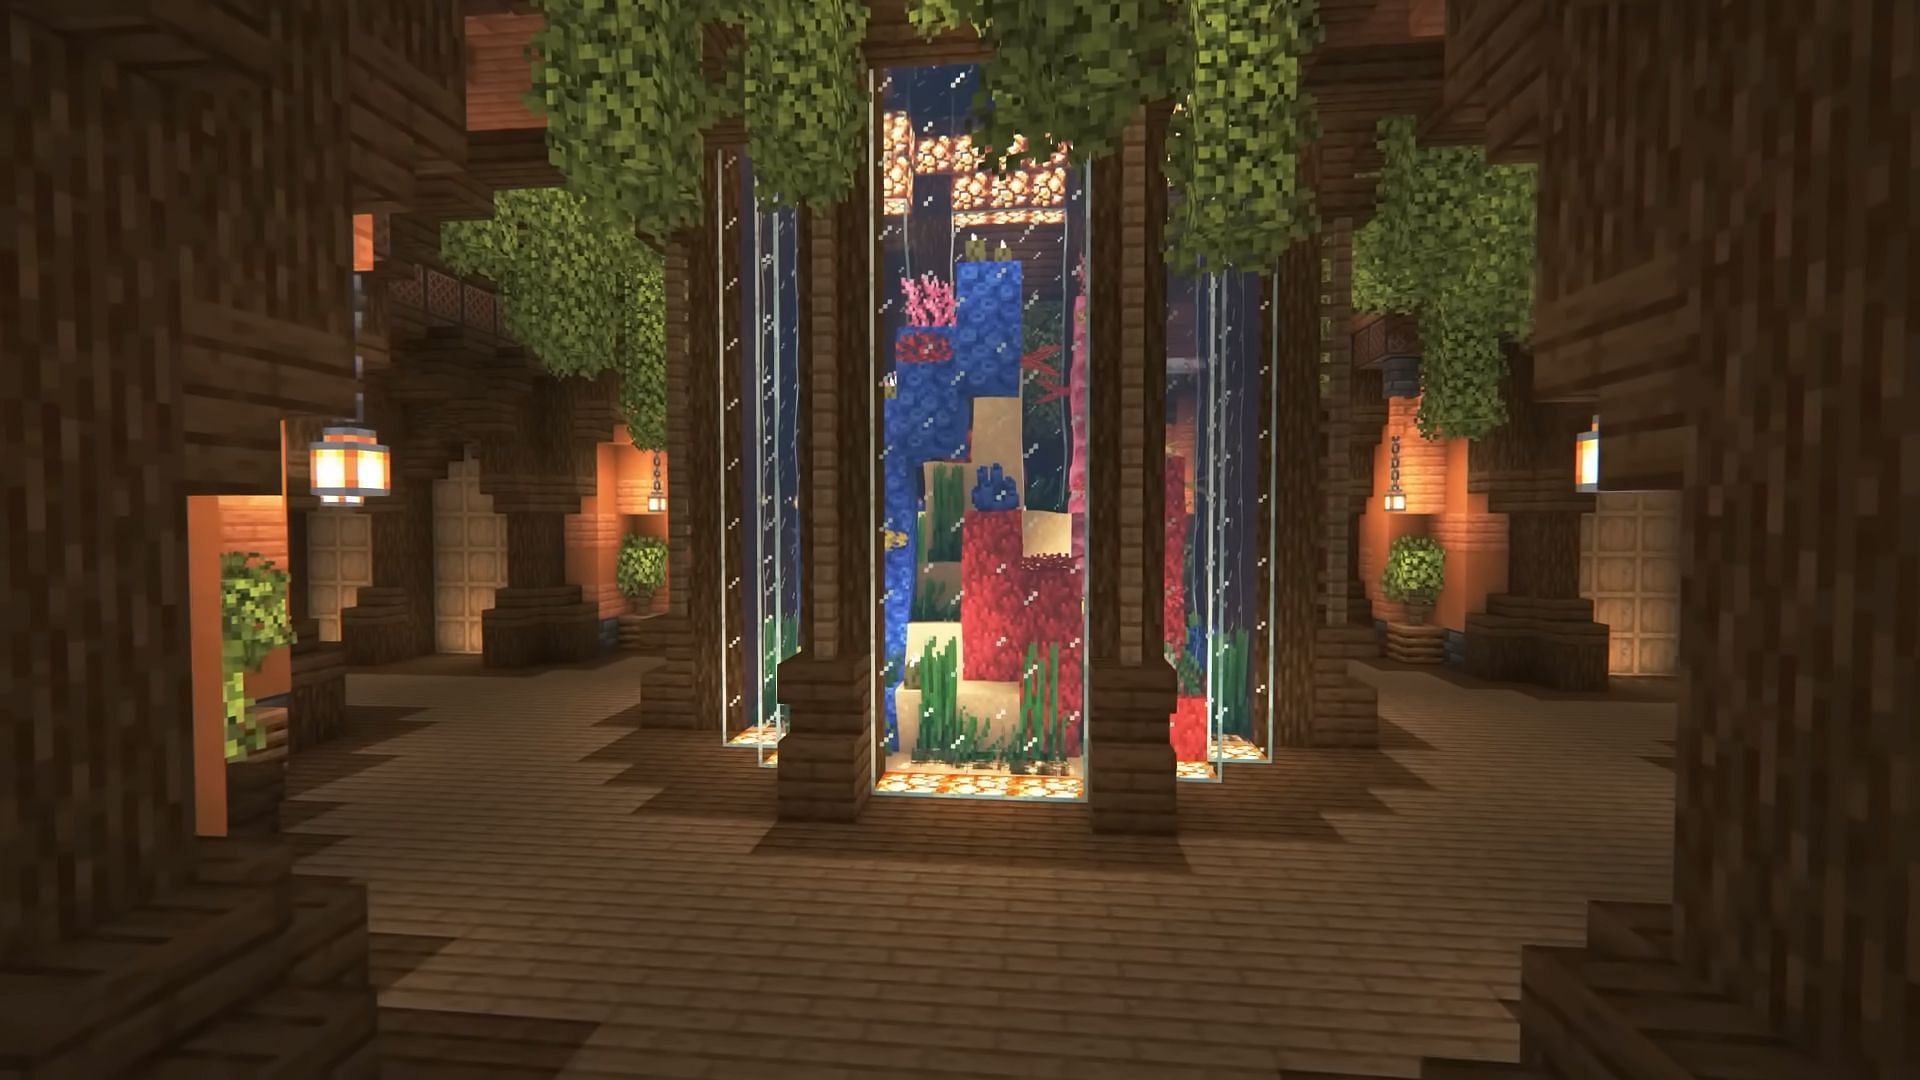 This Minecraft storage room design by BlueNerd is spectacular, to say the least (Image via BlueNerd/YouTube)